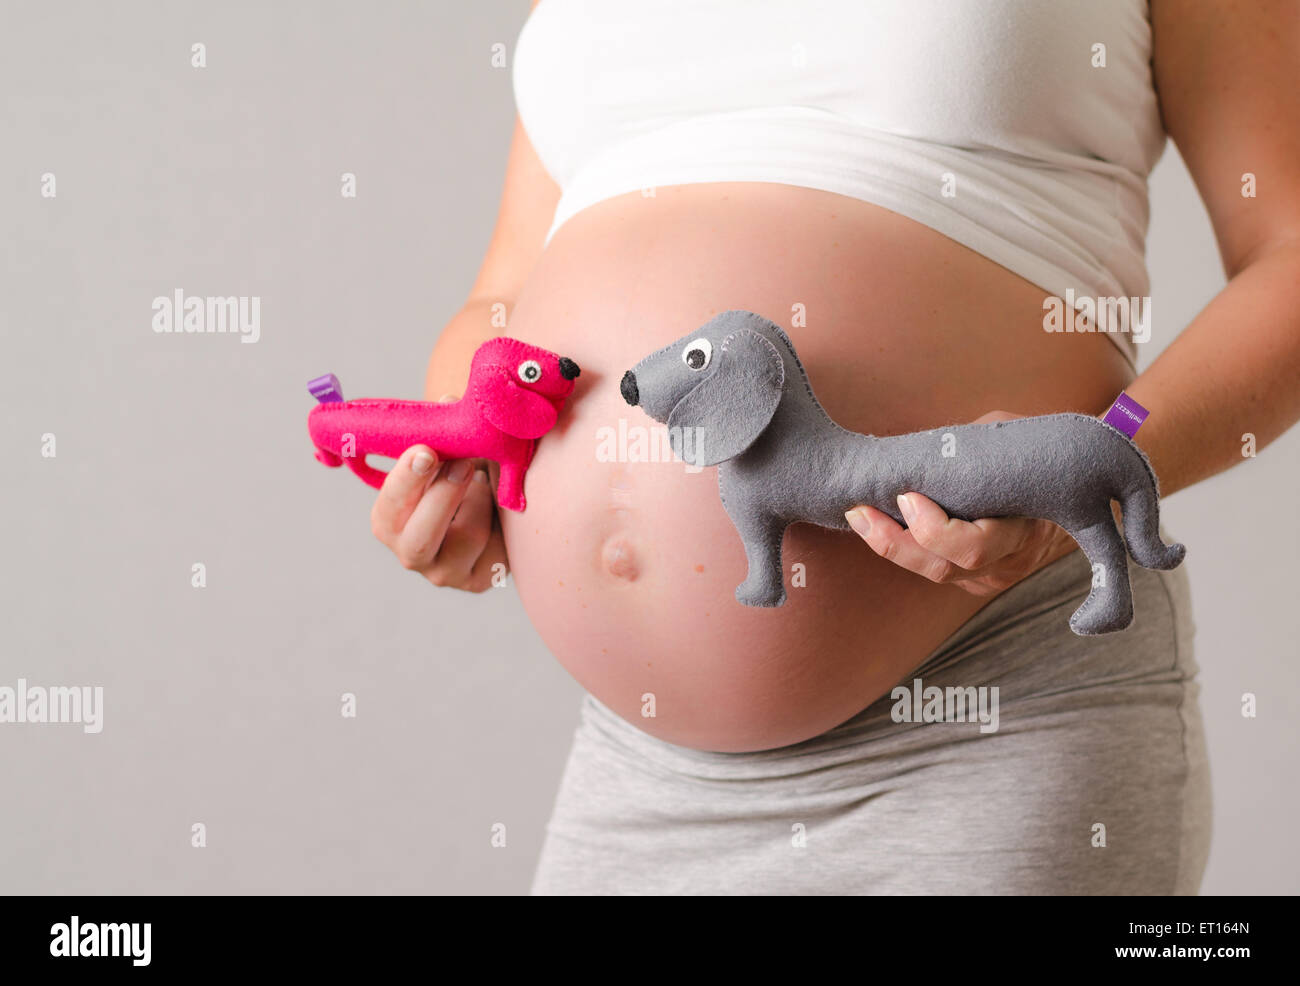 Pregnant woman maternity picture of her belly with a duck cuddly toy twins Stock Photo